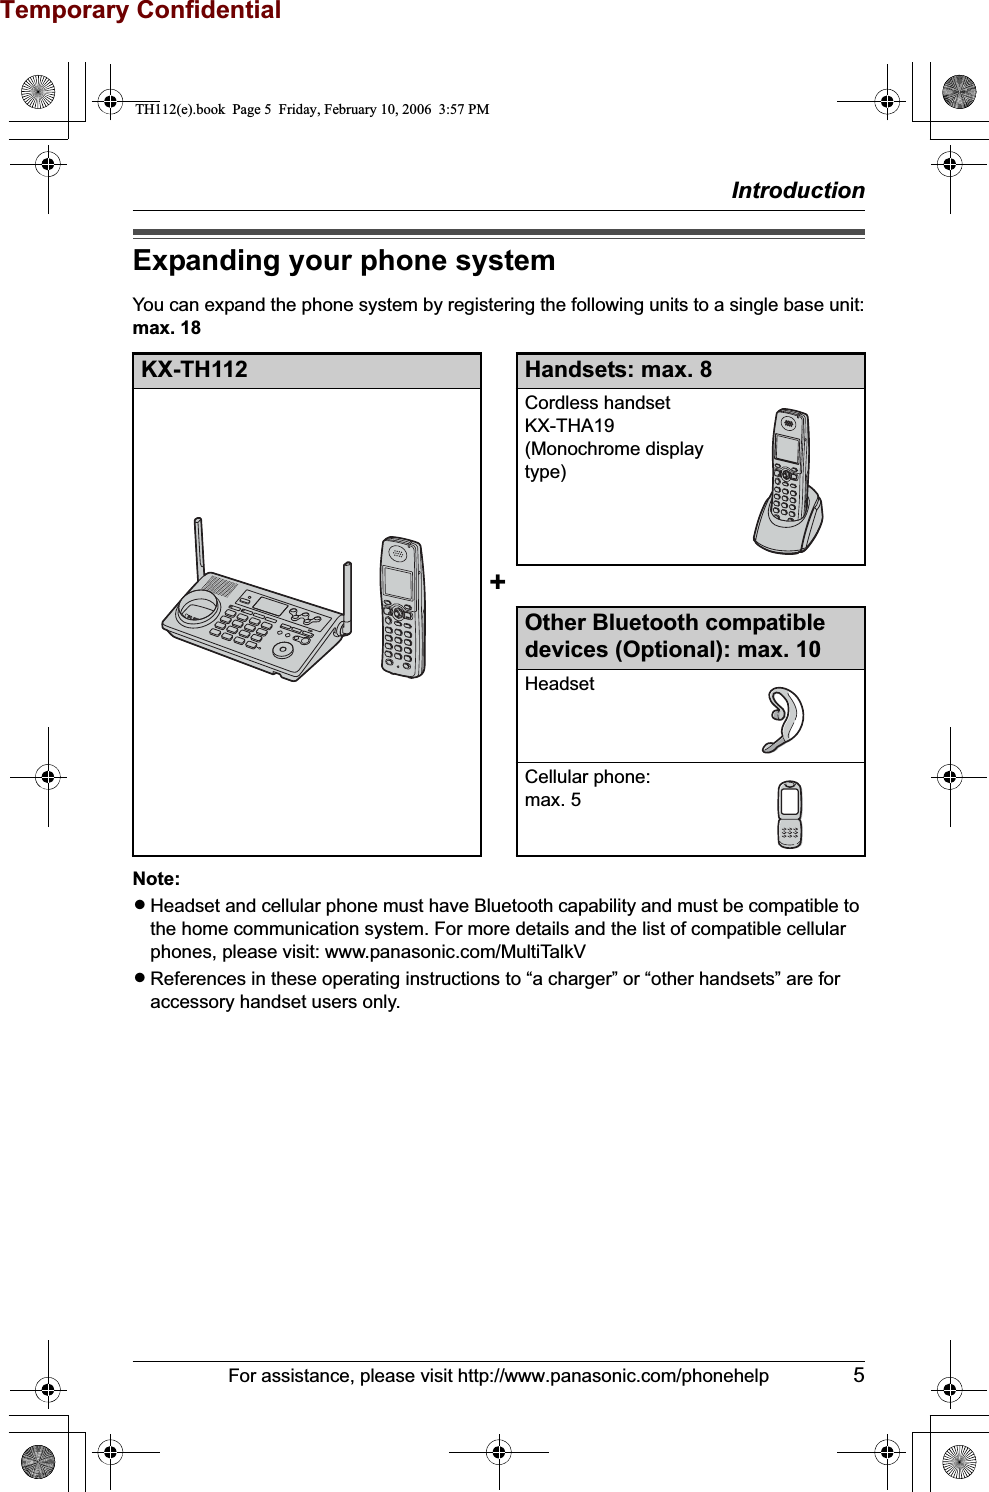 Temporary ConfidentialIntroductionFor assistance, please visit http://www.panasonic.com/phonehelp 5Expanding your phone systemYou can expand the phone system by registering the following units to a single base unit:max. 18Note:LHeadset and cellular phone must have Bluetooth capability and must be compatible to the home communication system. For more details and the list of compatible cellular phones, please visit: www.panasonic.com/MultiTalkVLReferences in these operating instructions to “a charger” or “other handsets” are for accessory handset users only. KX-TH112 Handsets: max. 8Cordless handsetKX-THA19(Monochrome display type)+Other Bluetooth compatible devices (Optional): max. 10HeadsetCellular phone:max. 5TH112(e).book  Page 5  Friday, February 10, 2006  3:57 PM